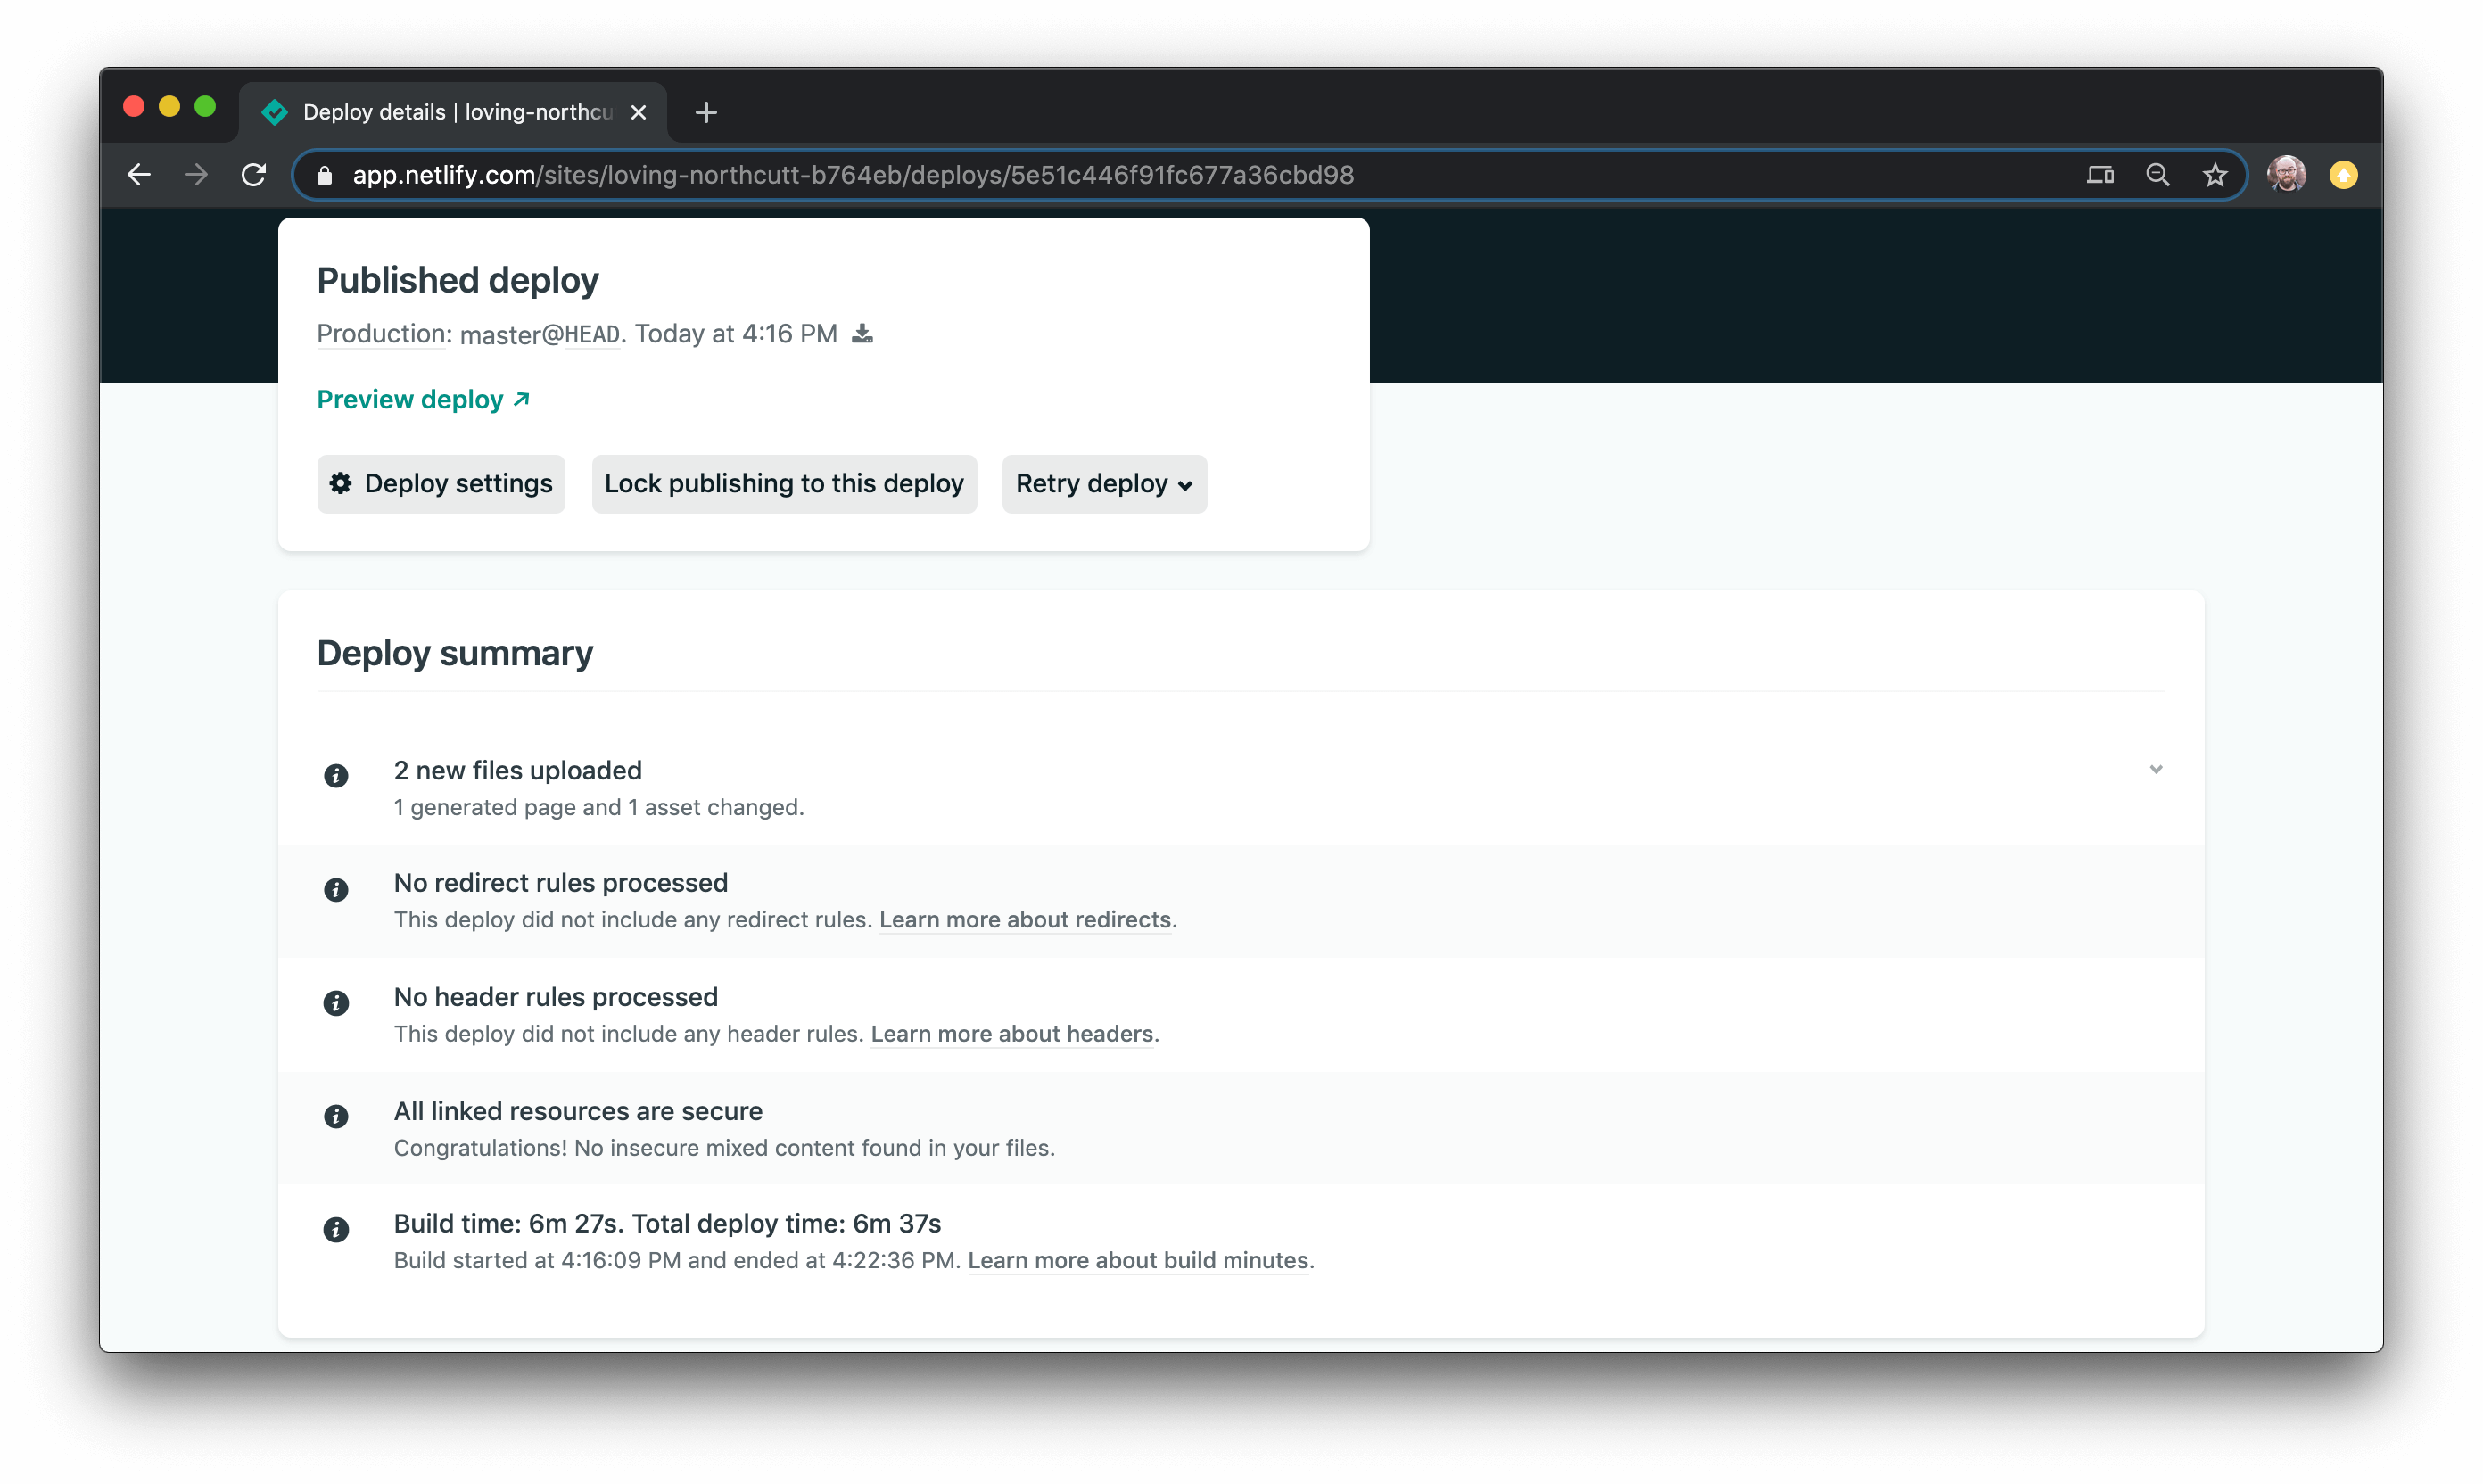 The Netlify deploy summary for the unoptimized build.